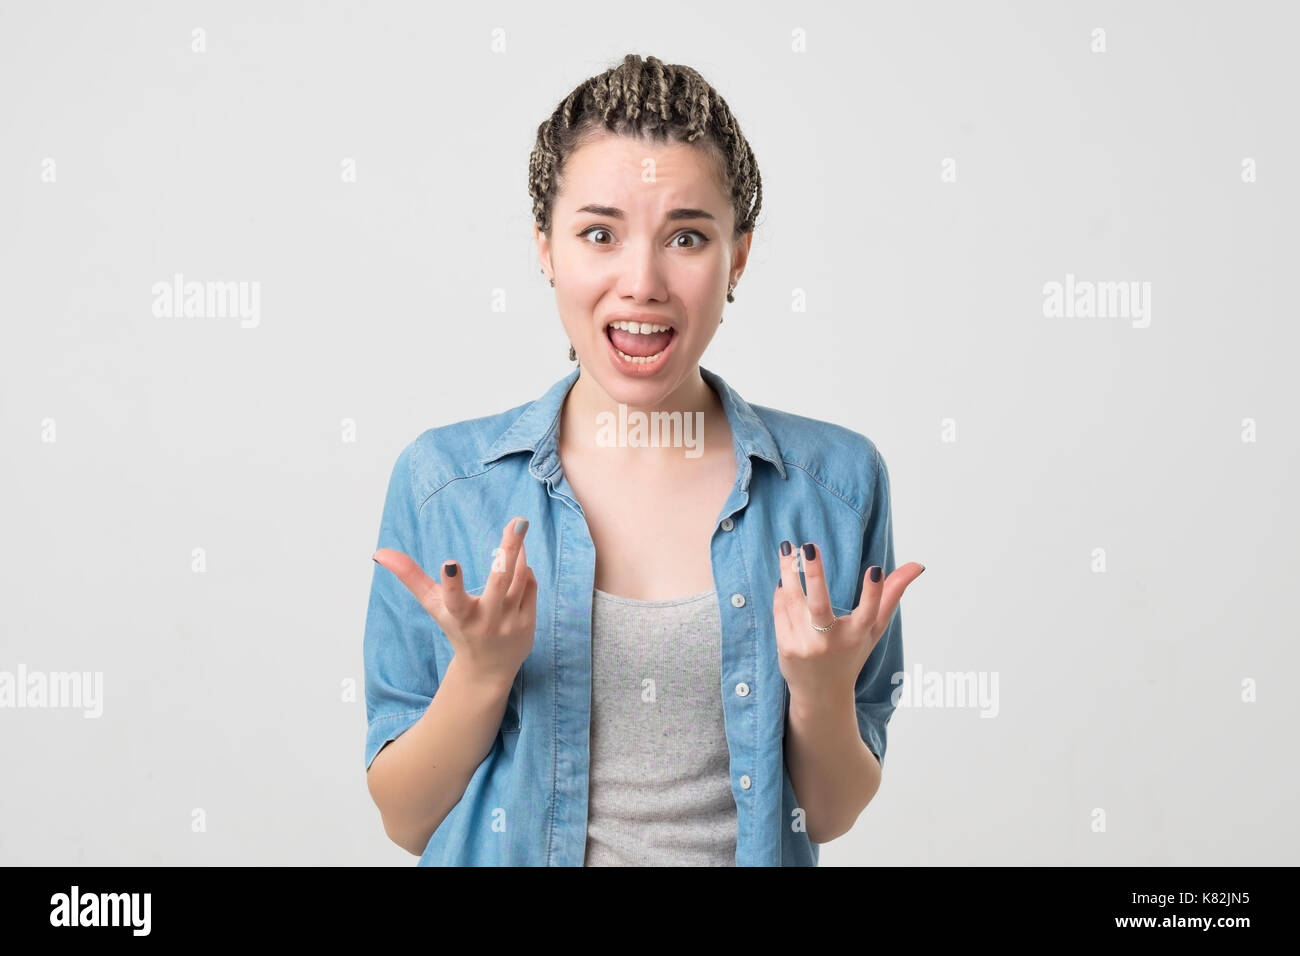 Close up isolated portrait of young caucasian annoyed angry woman holding hands in furious gesture. Stock Photo